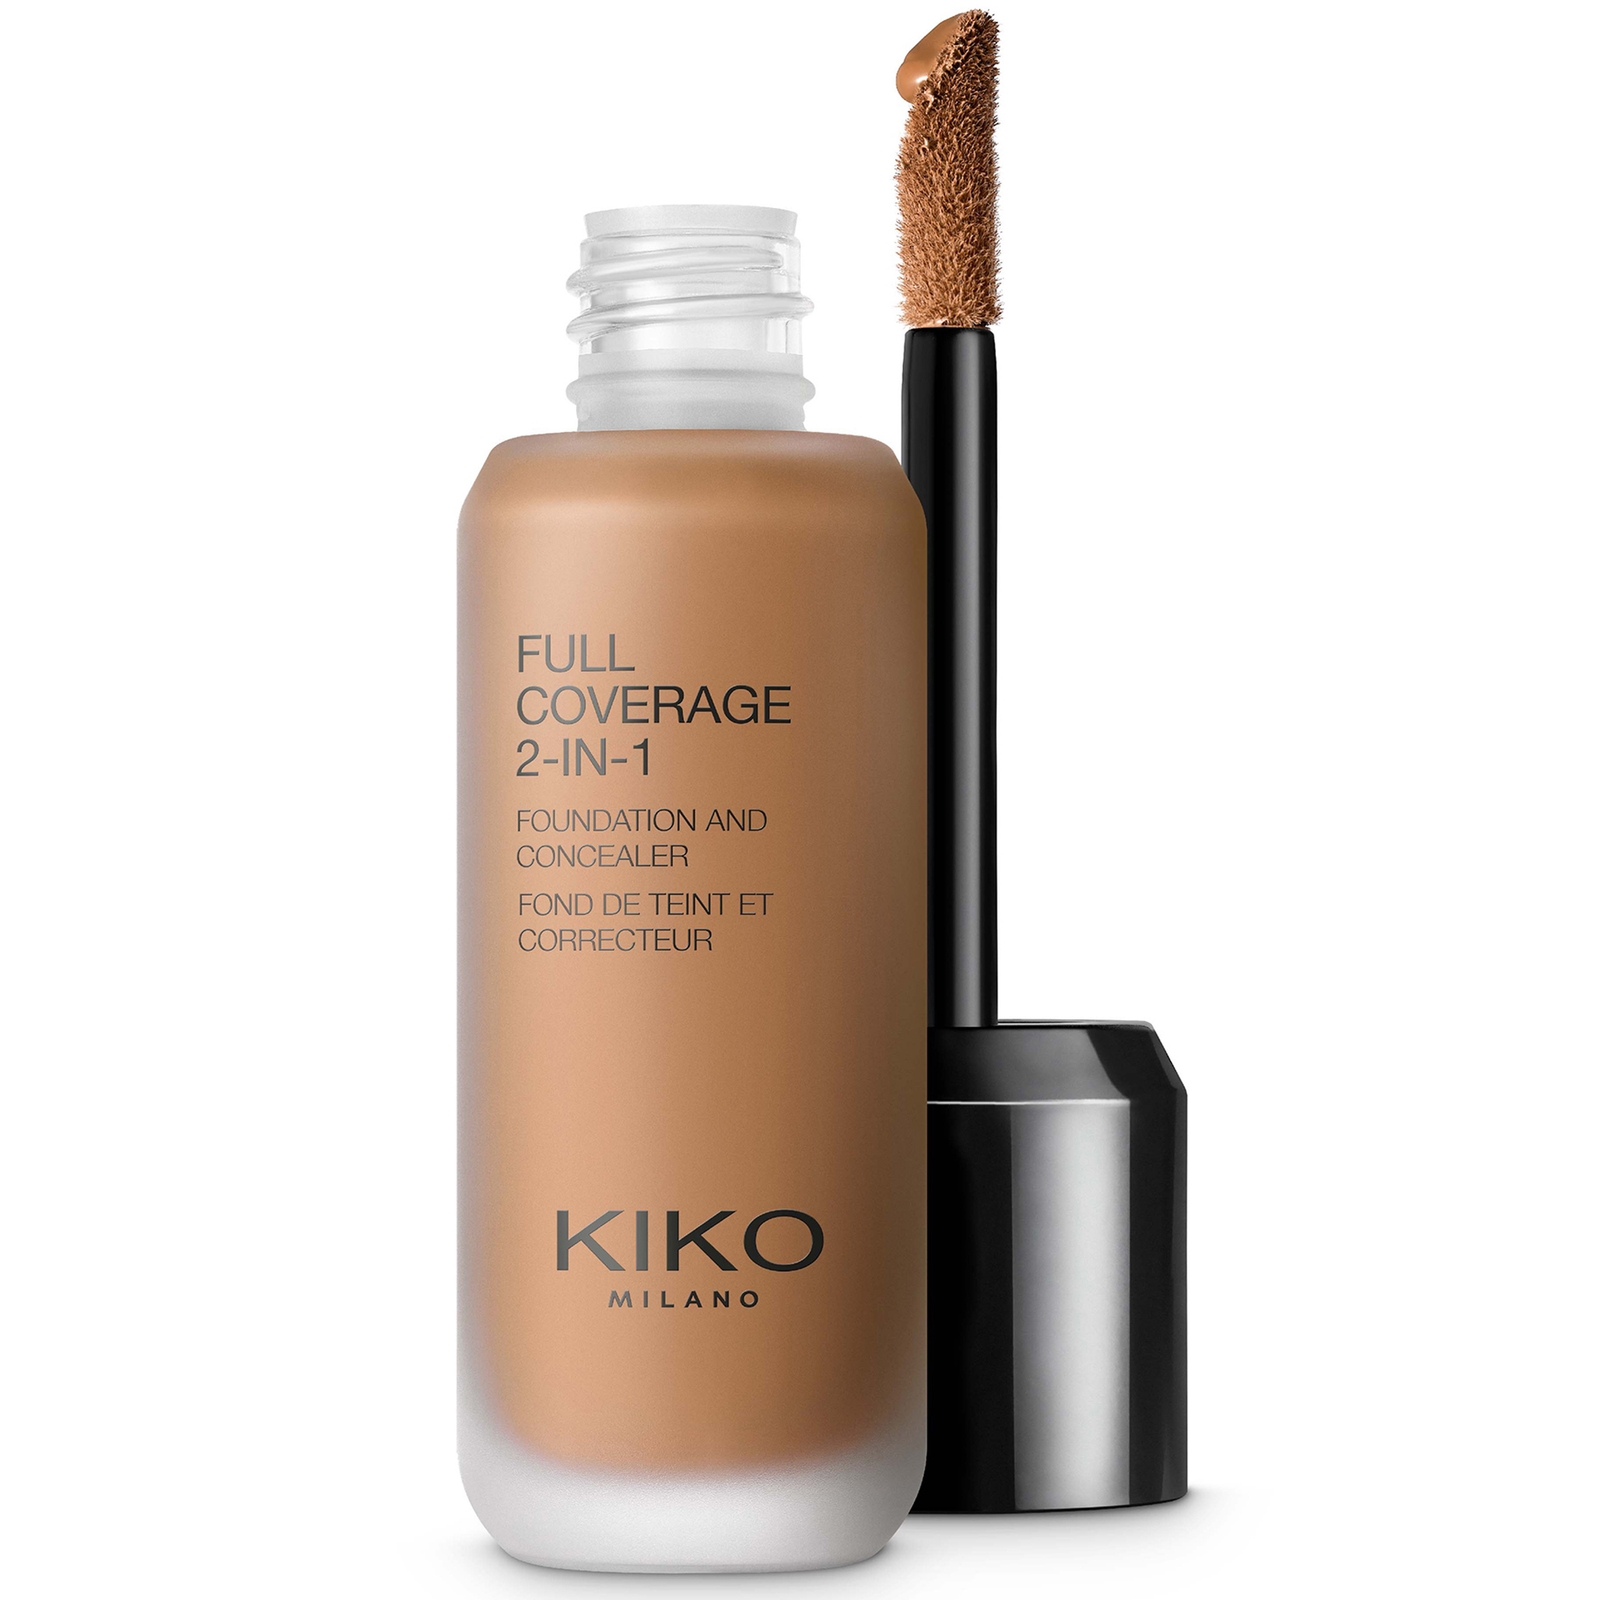 Image of KIKO Milano Full Coverage 2-in-1 Foundation and Concealer 25ml (Various Shades) - 120 Neutral